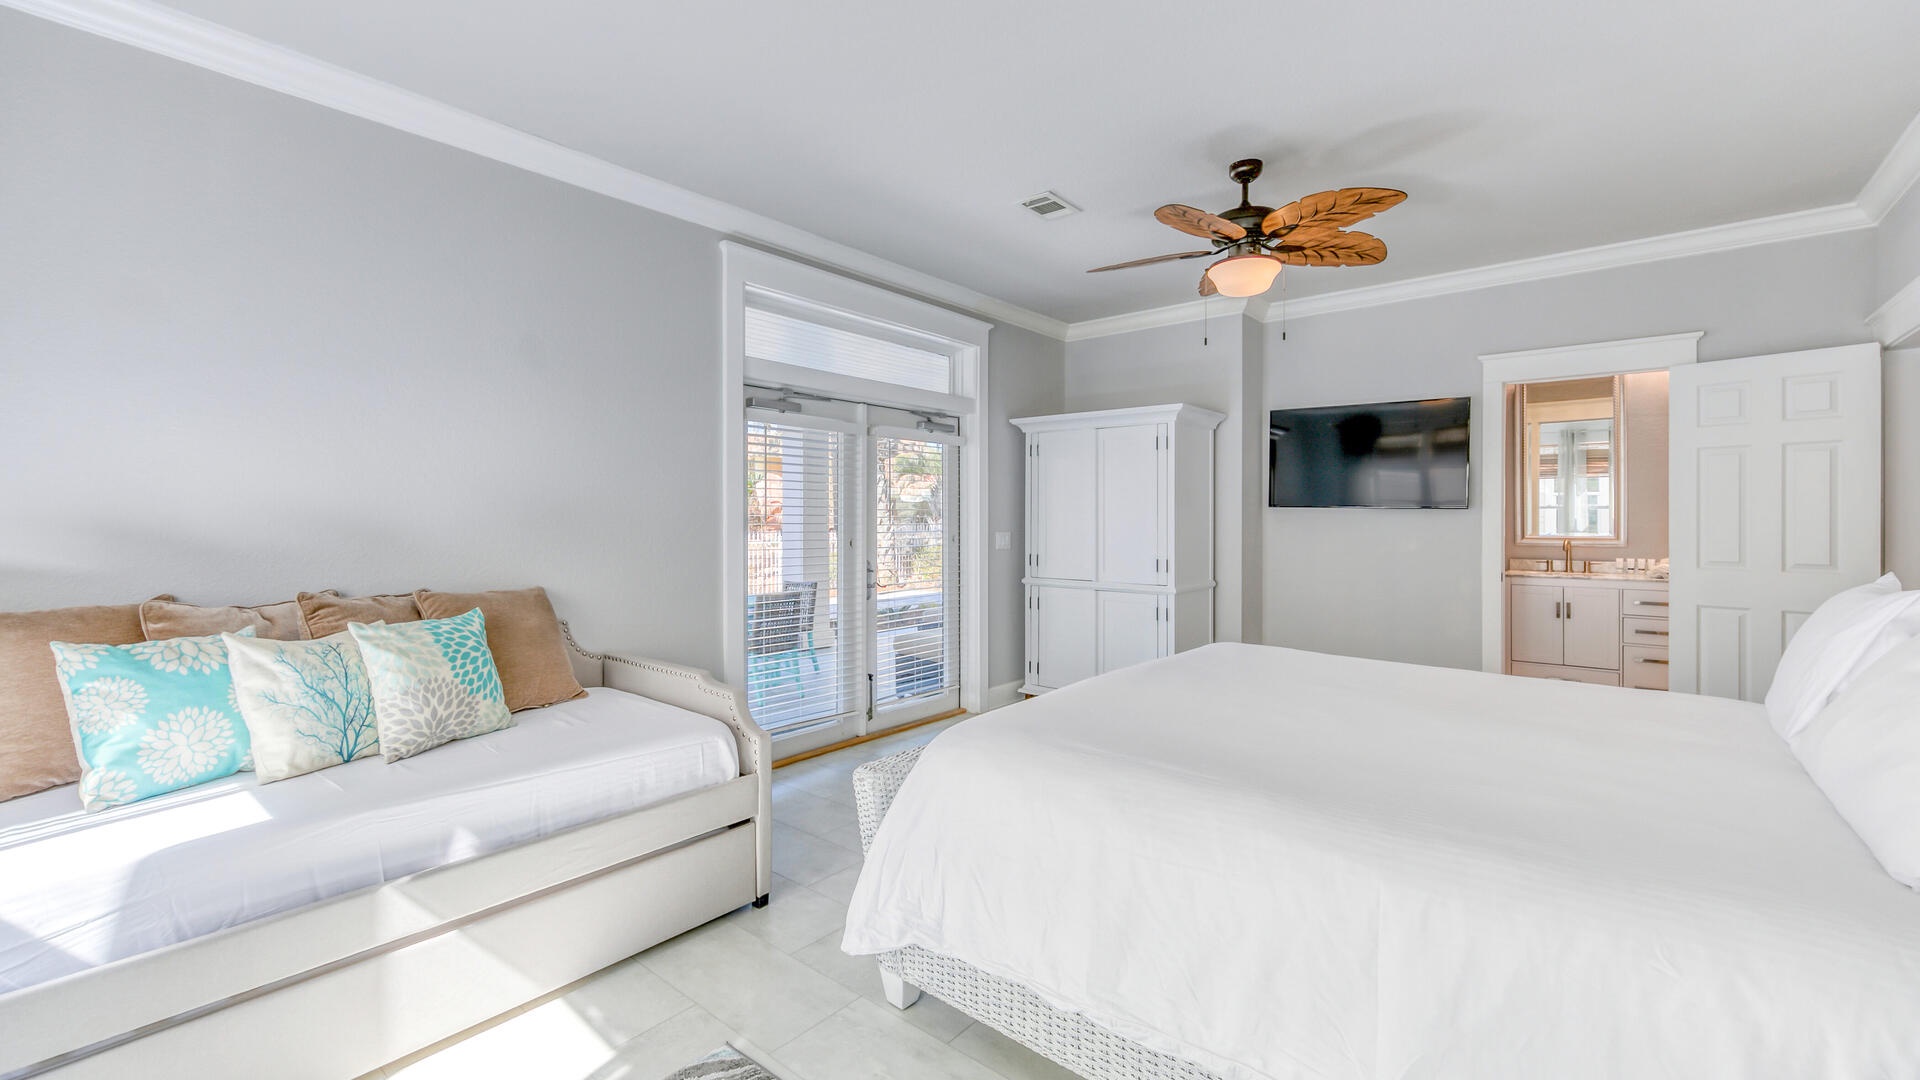 The ground floor master features a king size bed, with Jack-n-Jill bathroom and pool patio access!